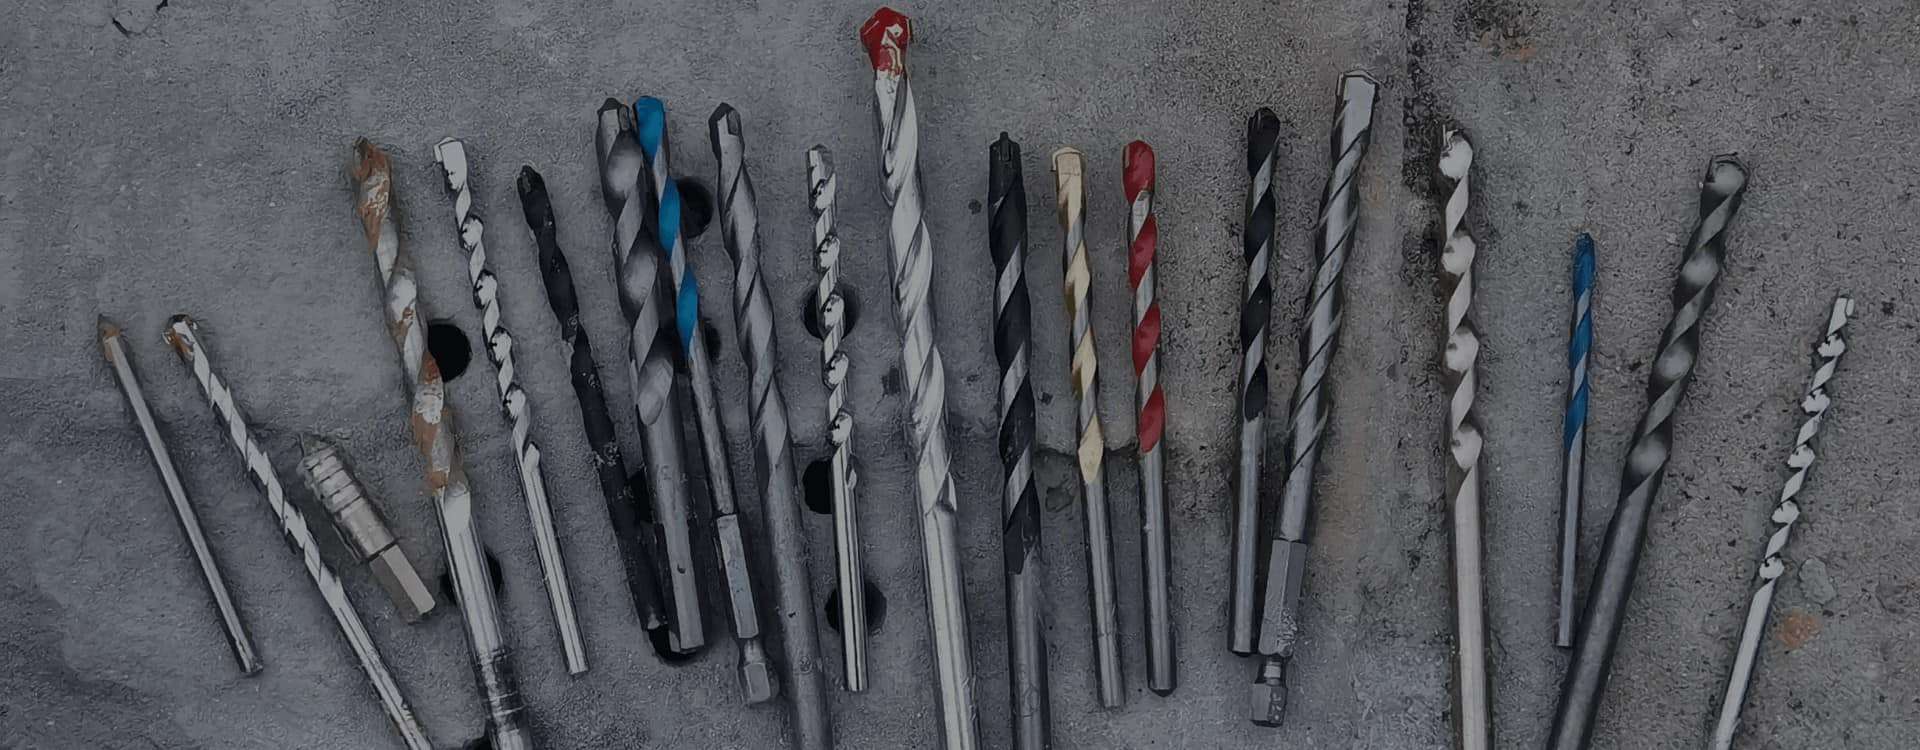 TENYU TOOL MANSONRY DRILL BITS SUPPLIER AND MANUFACTURER